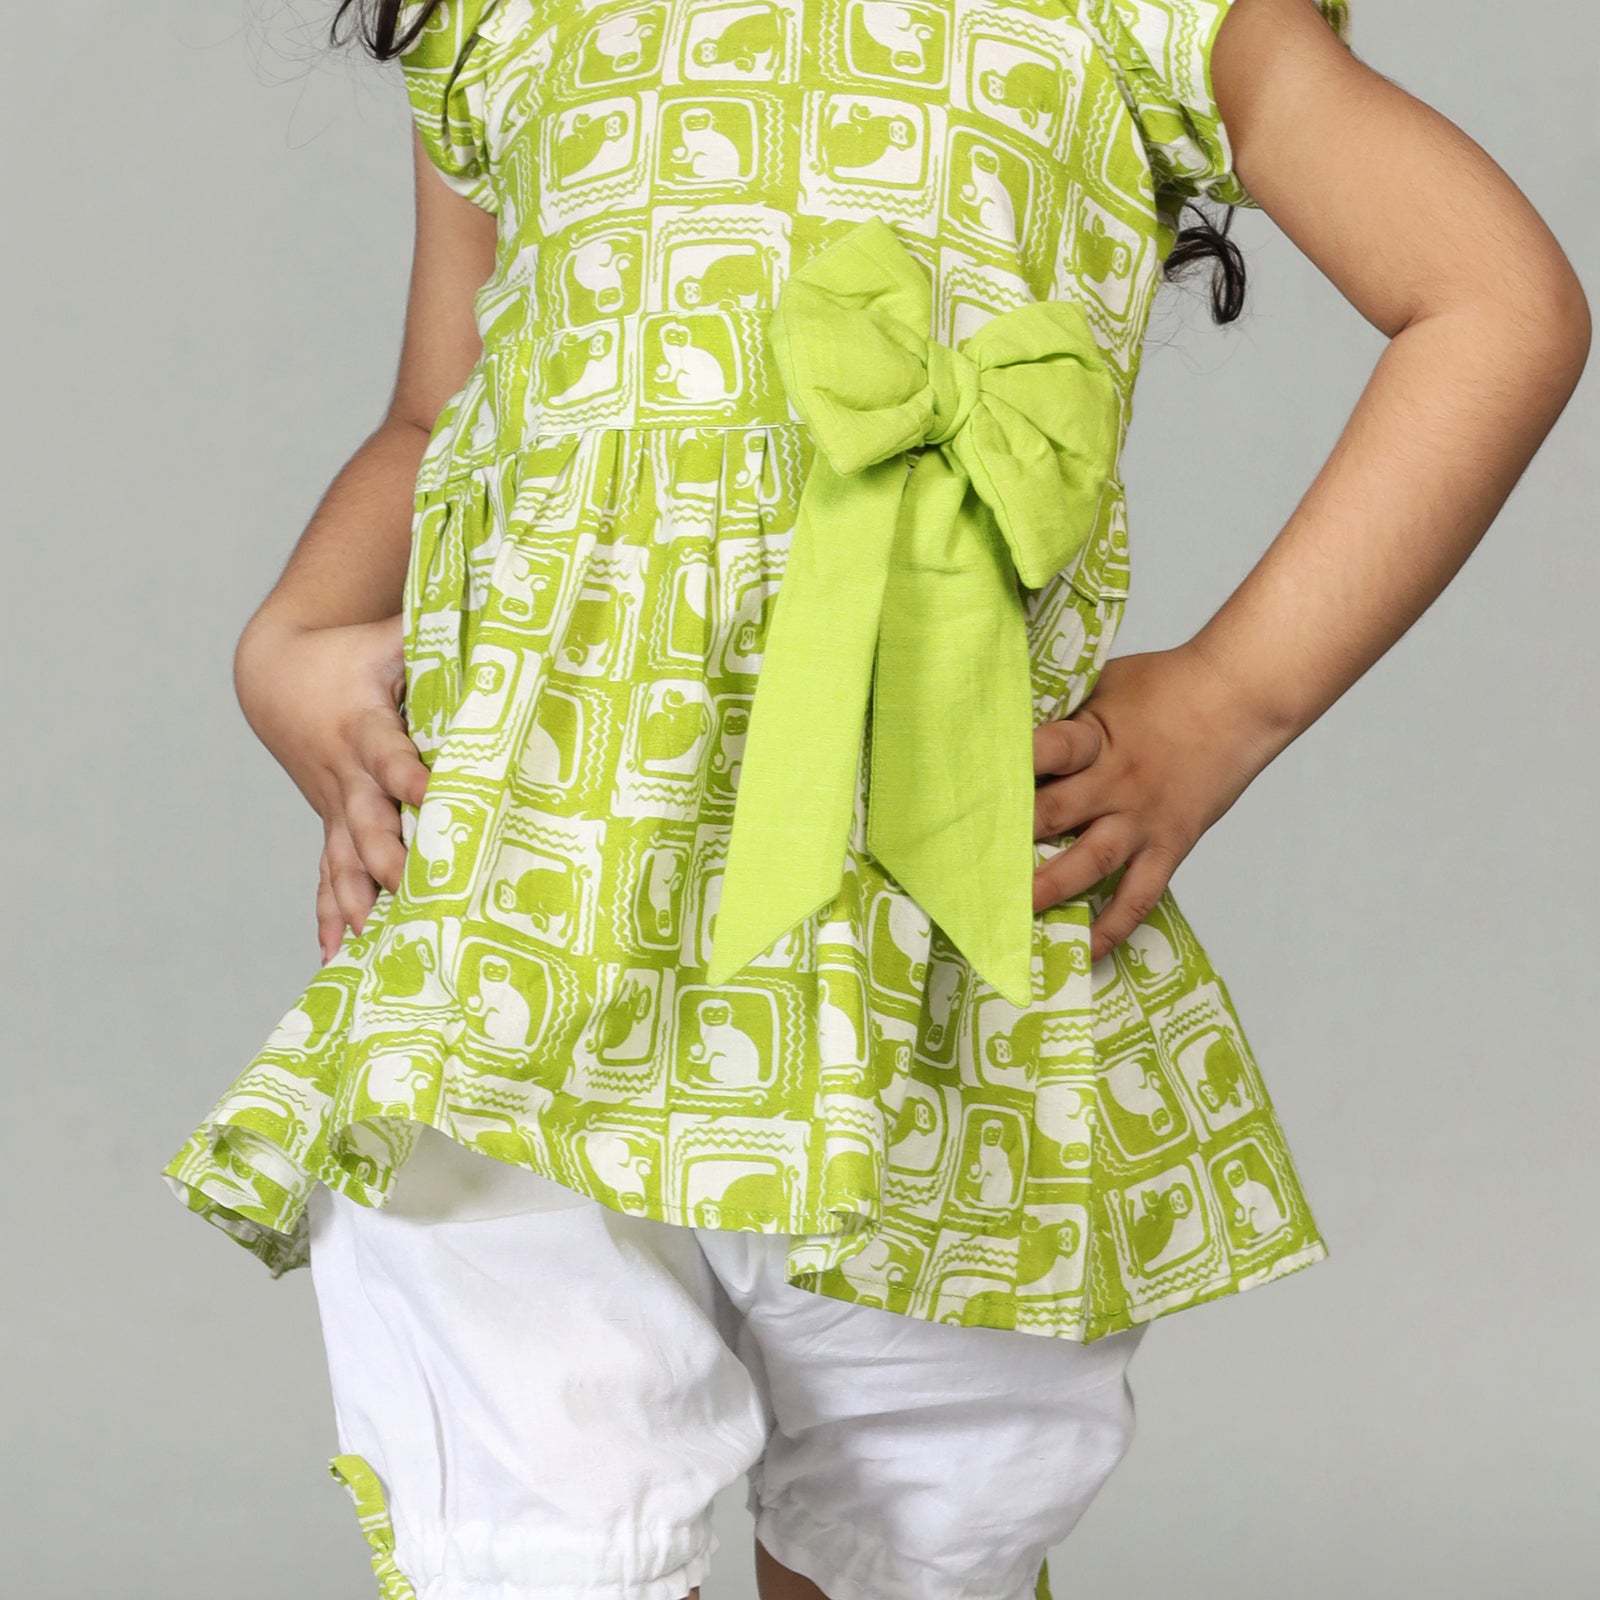 Cotton Flared Top with Balloon Shorts For Girls with The Monkey & The Crocodile Print